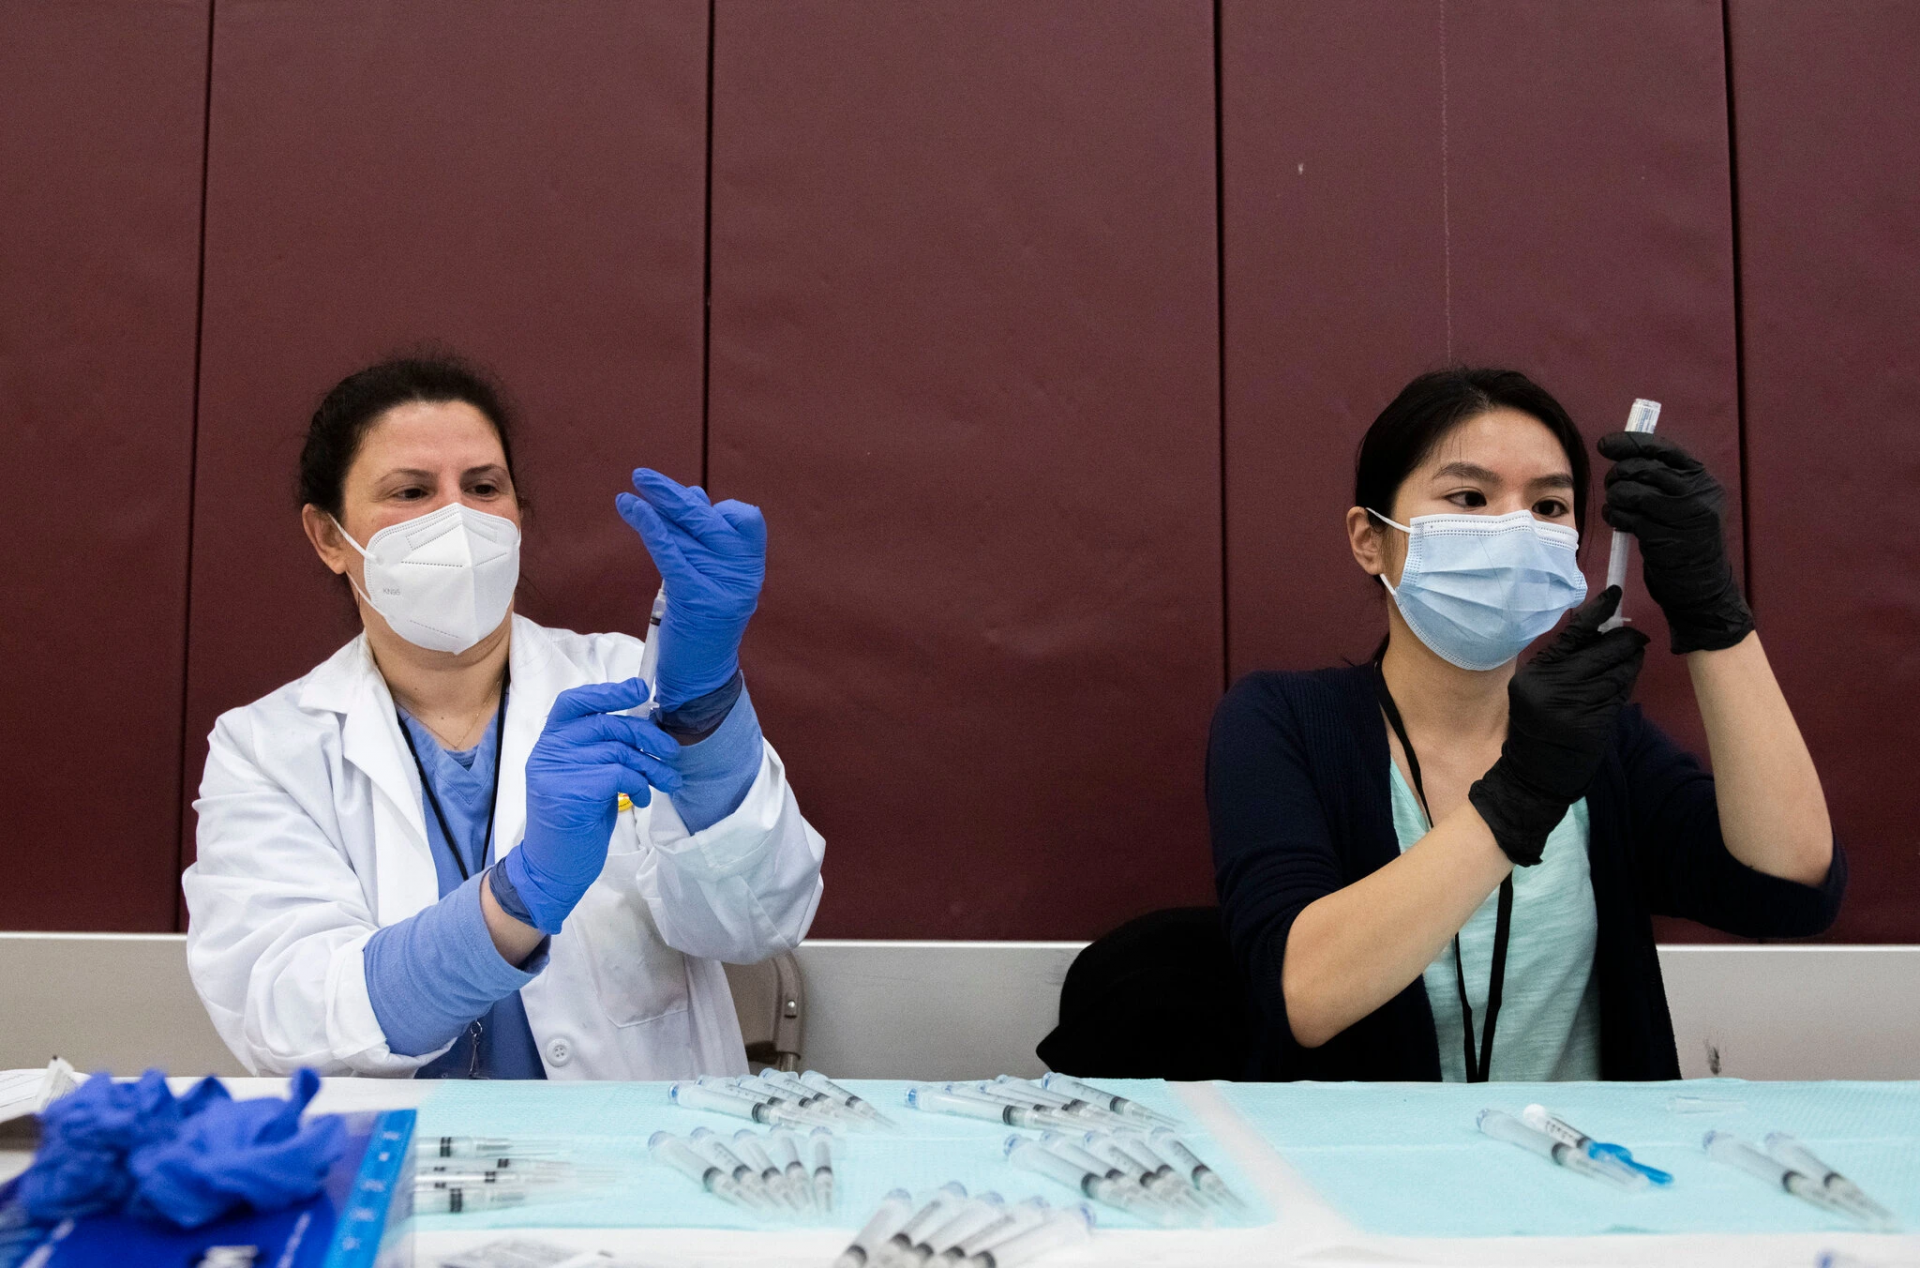 Pharmacists prepared syringes with the Johnson & Johnson vaccine in Detroit on Monday. More than seven million people in the United States have received the vaccine.Credit...Nicole Hester/Ann Arbor News, via Associated Press